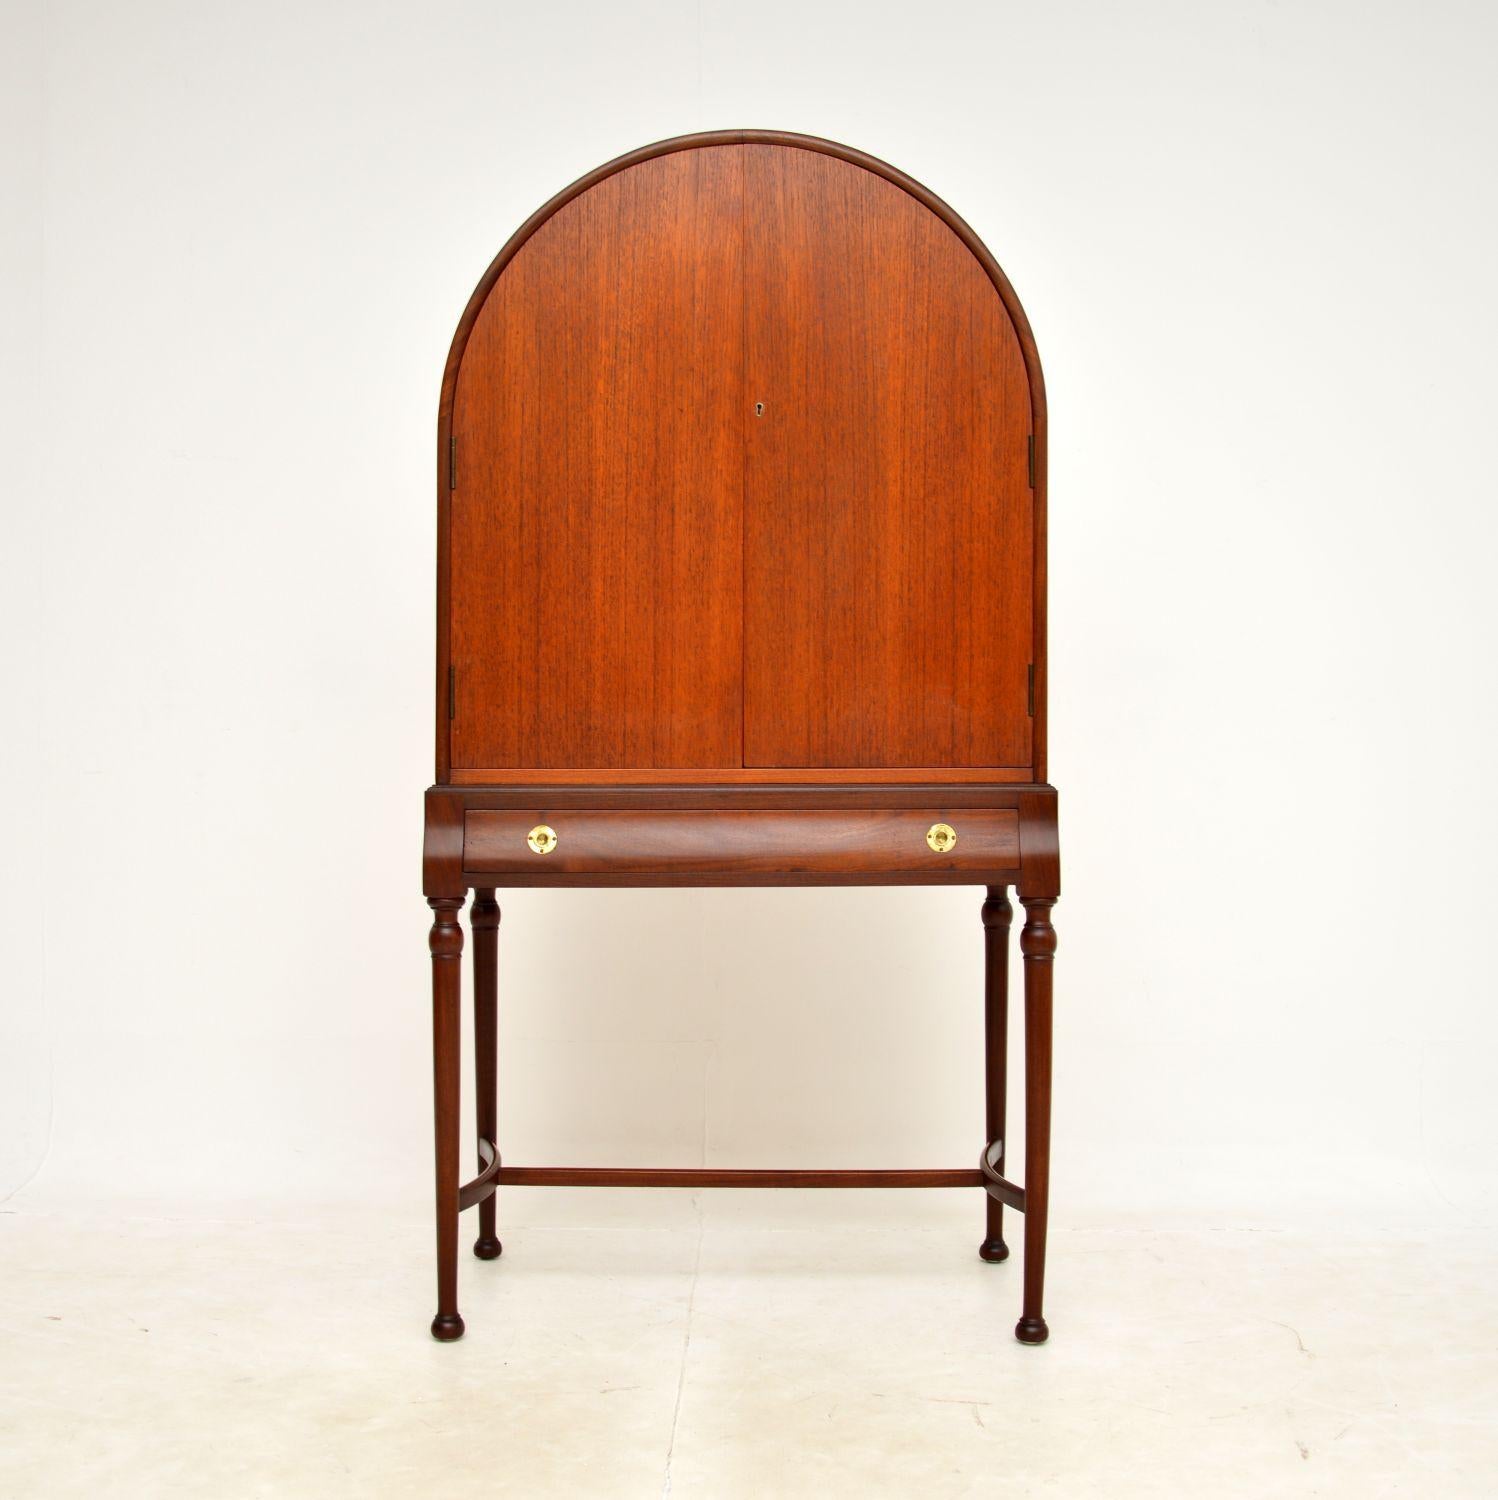 A very stylish and extremely rare vintage teak drinks cabinet. This was almost certainly designed by Robert Heritage, it was made in England, and dates from the 1960s.

Robert Heritage produced some pieces in the 1960’s for a little known British